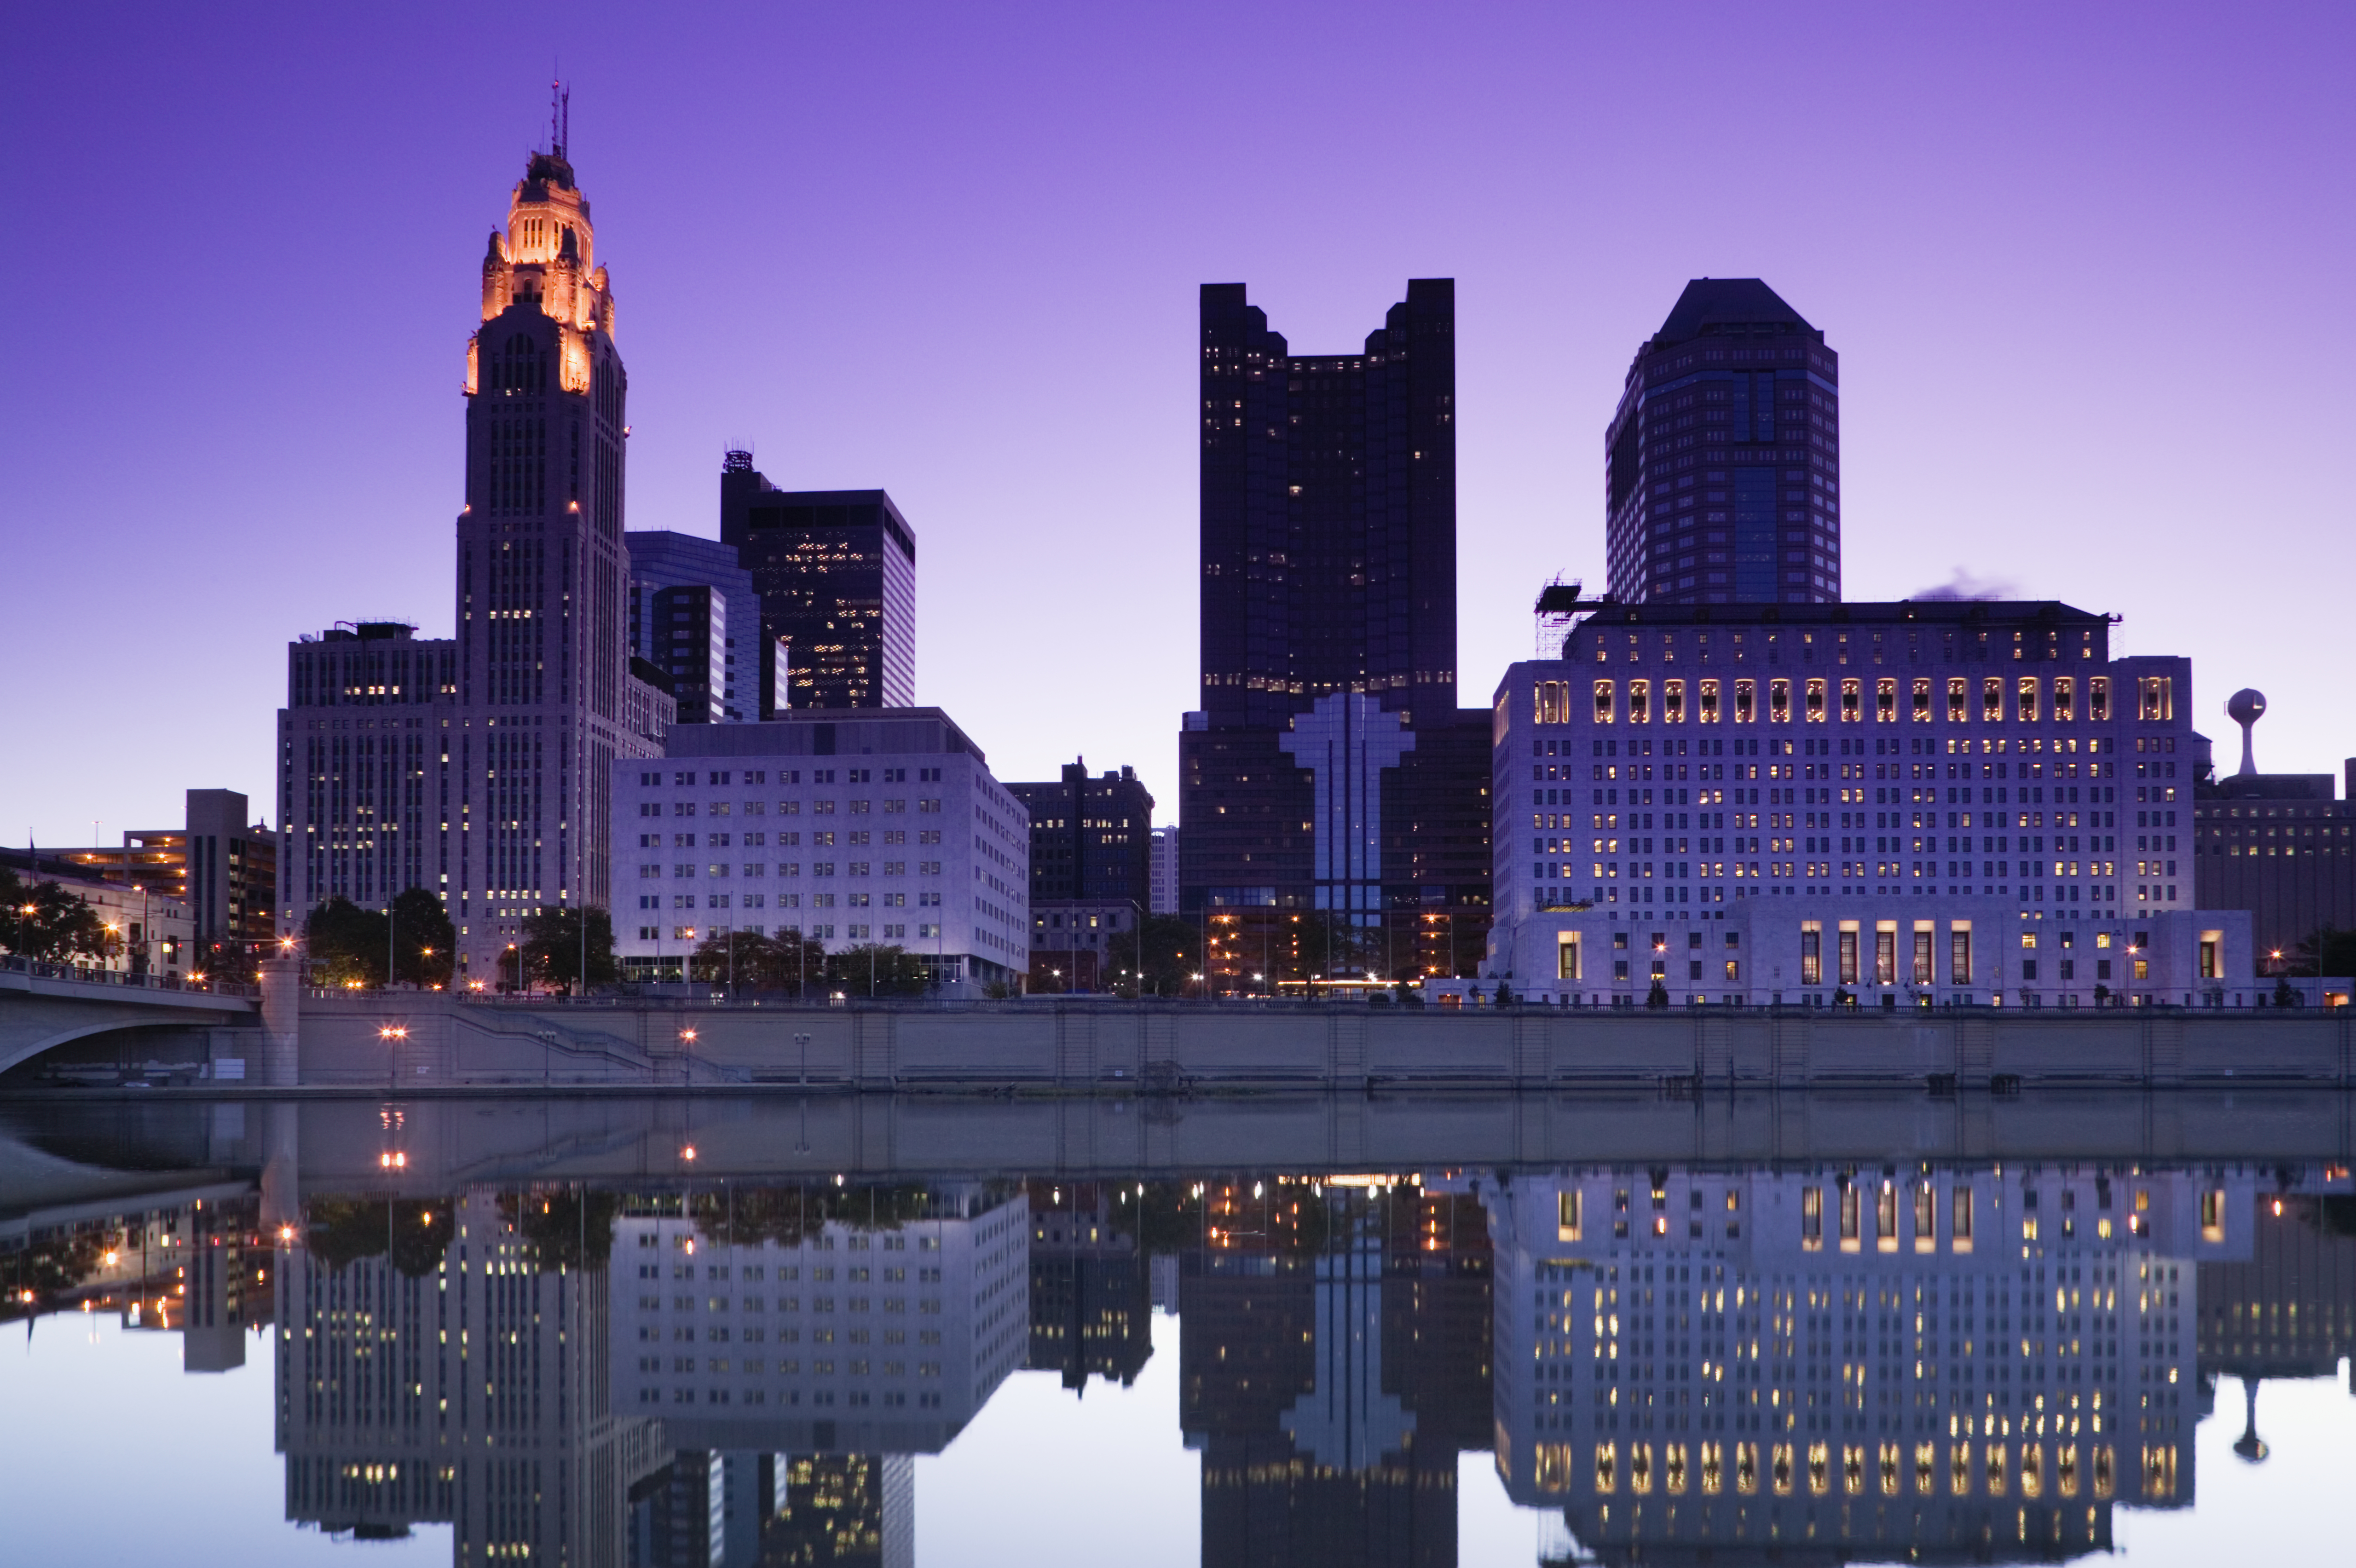 Columbus could be the next startup city | TechCrunch